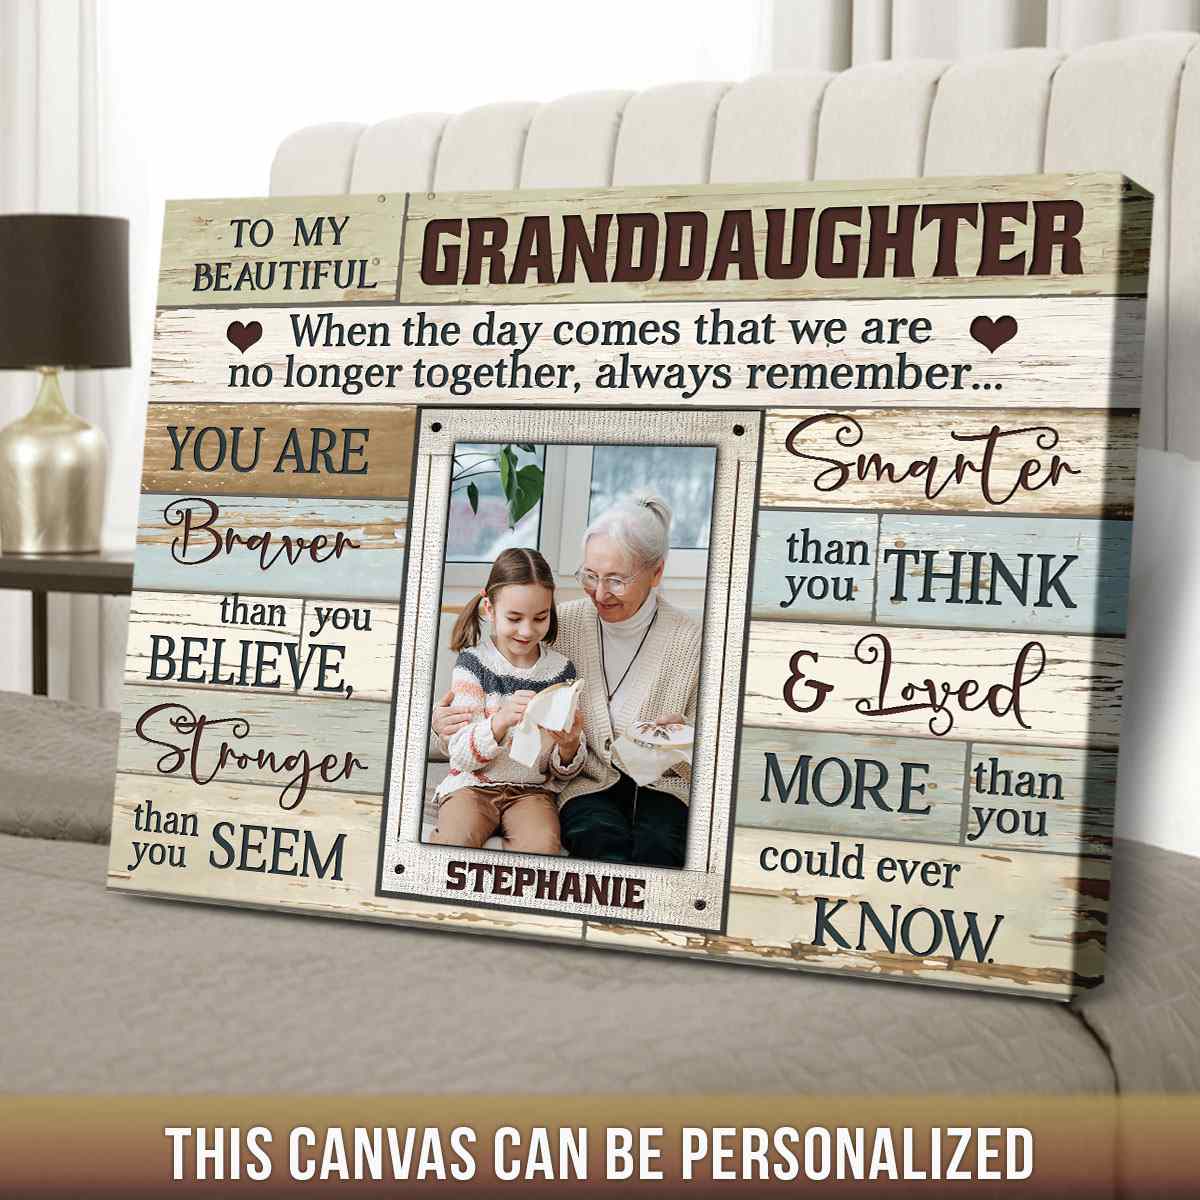 https://images.ohcanvas.com/ohcanvas_com/2022/06/17025520/custom-canvas-gift-for-granddaughter-from-grandma-personalized-granddaughter-gifts02.jpg